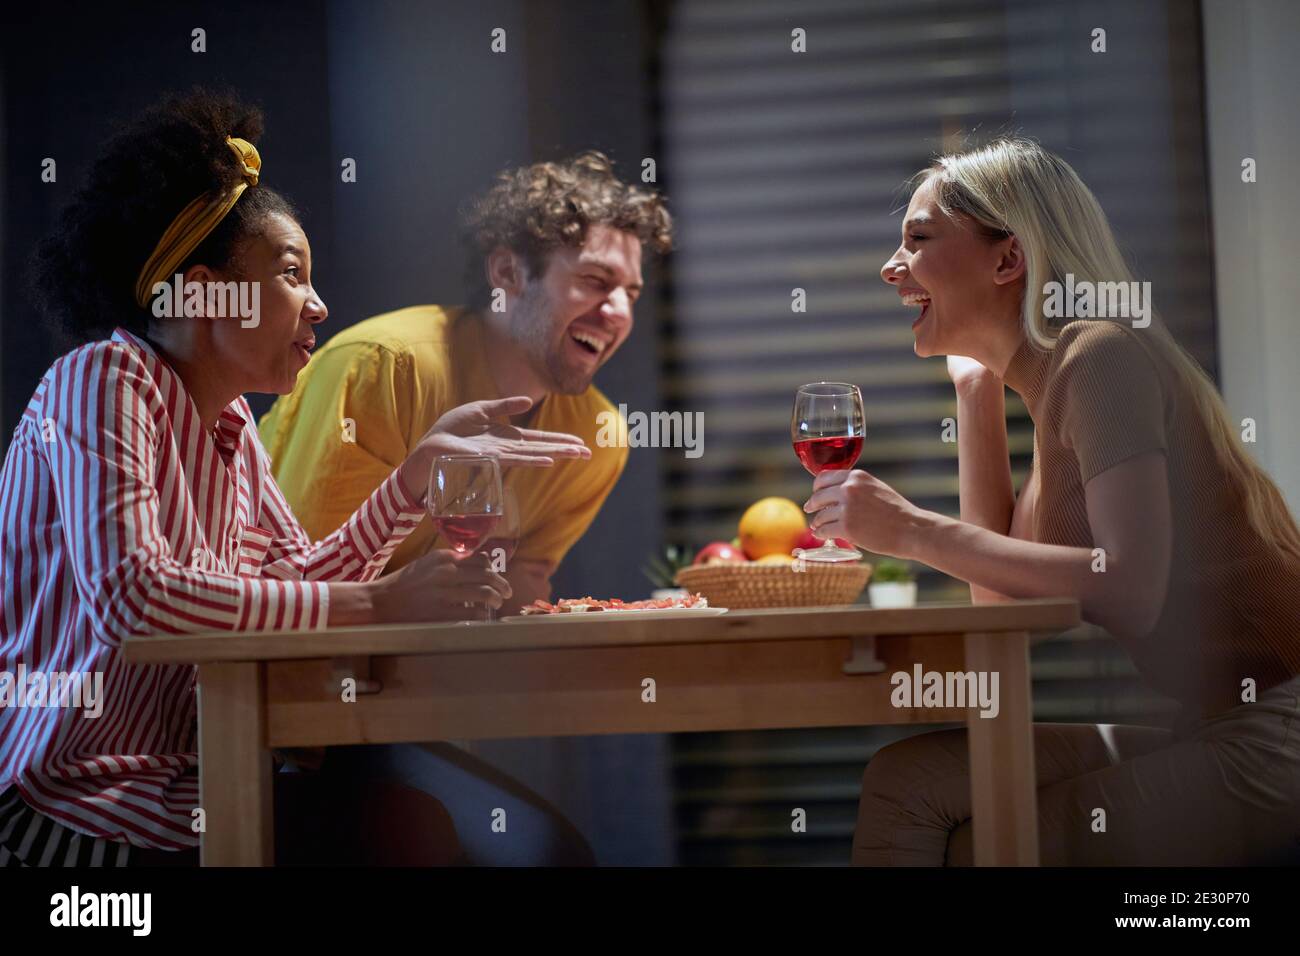 Group of three friends having home gathering together Stock Photo